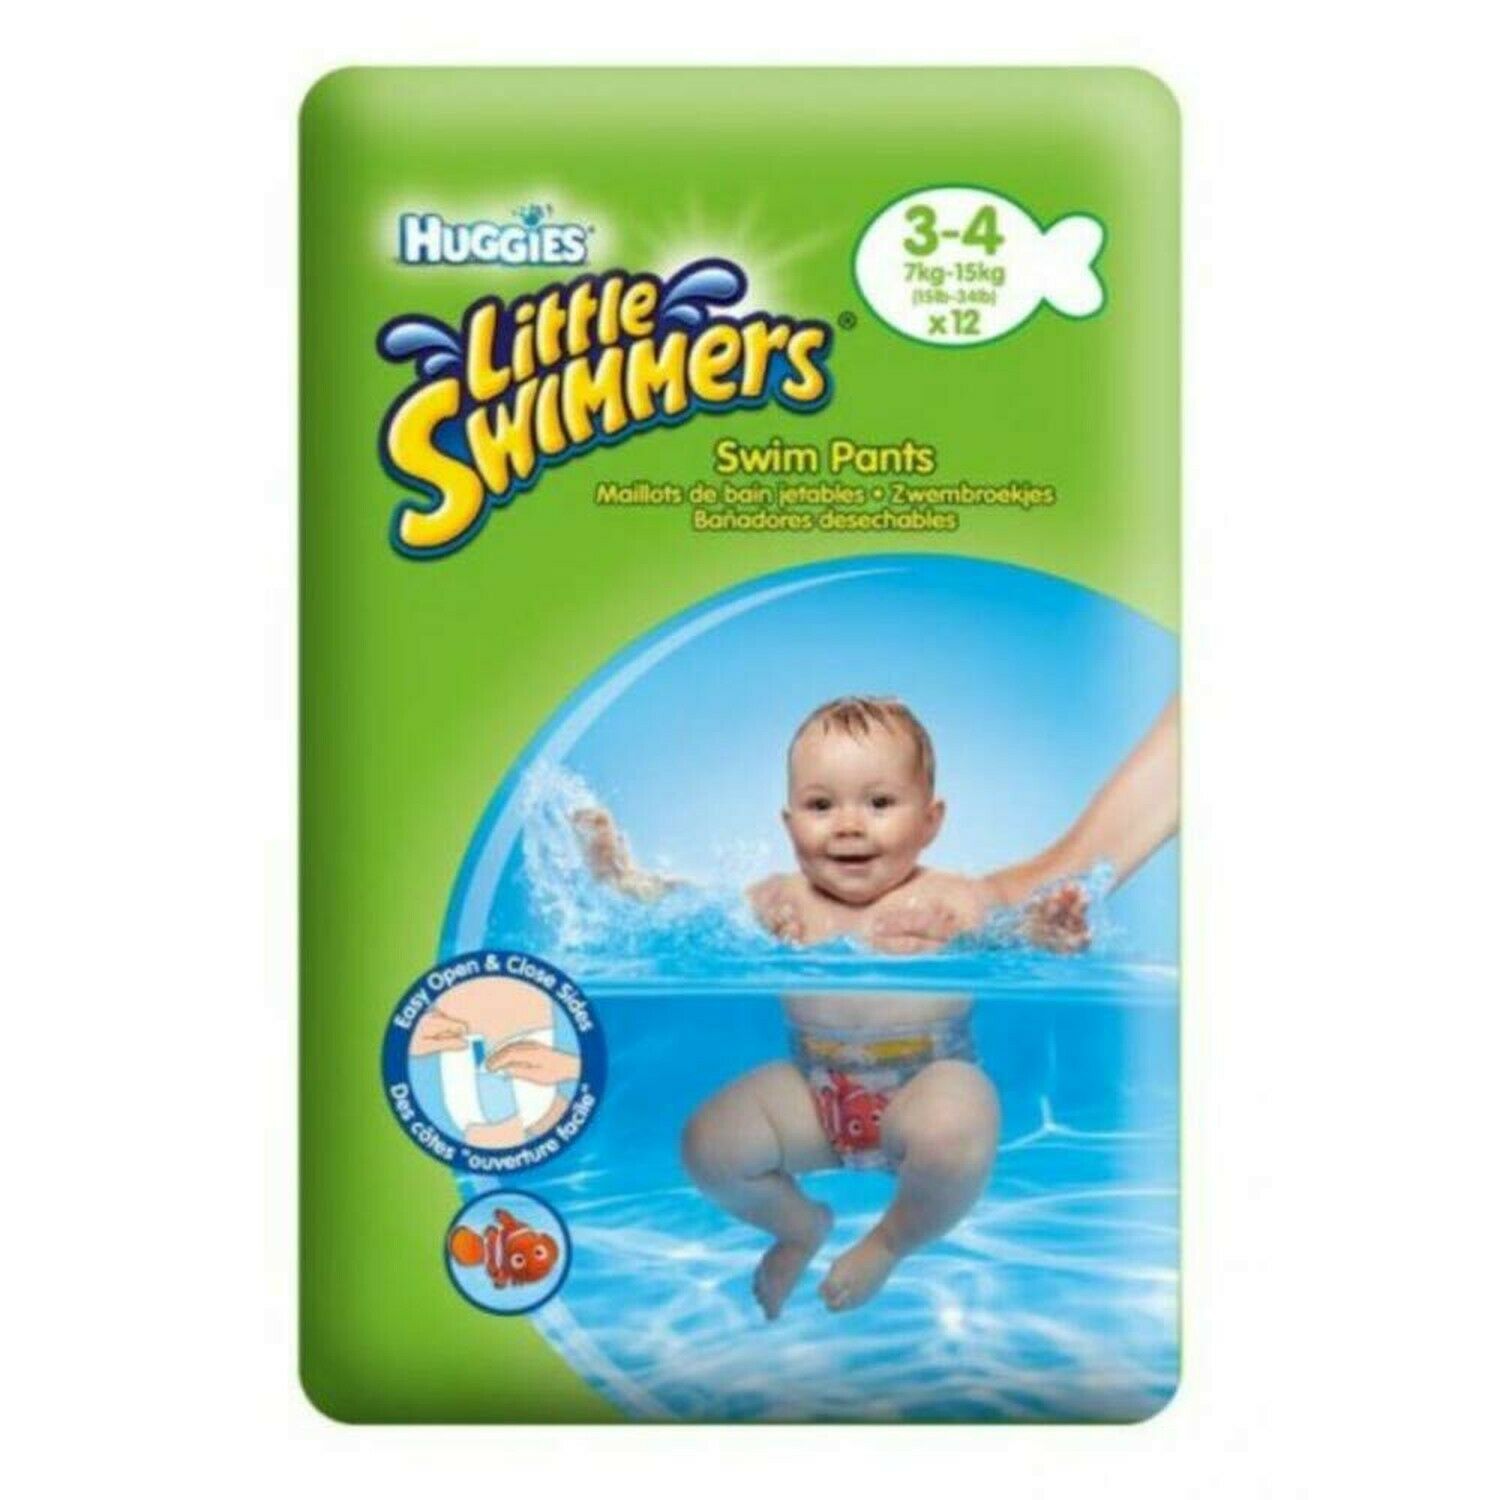 Huggies Little Swimmers Disposable Swim Diapers, Small, 12-count - Pink/blue